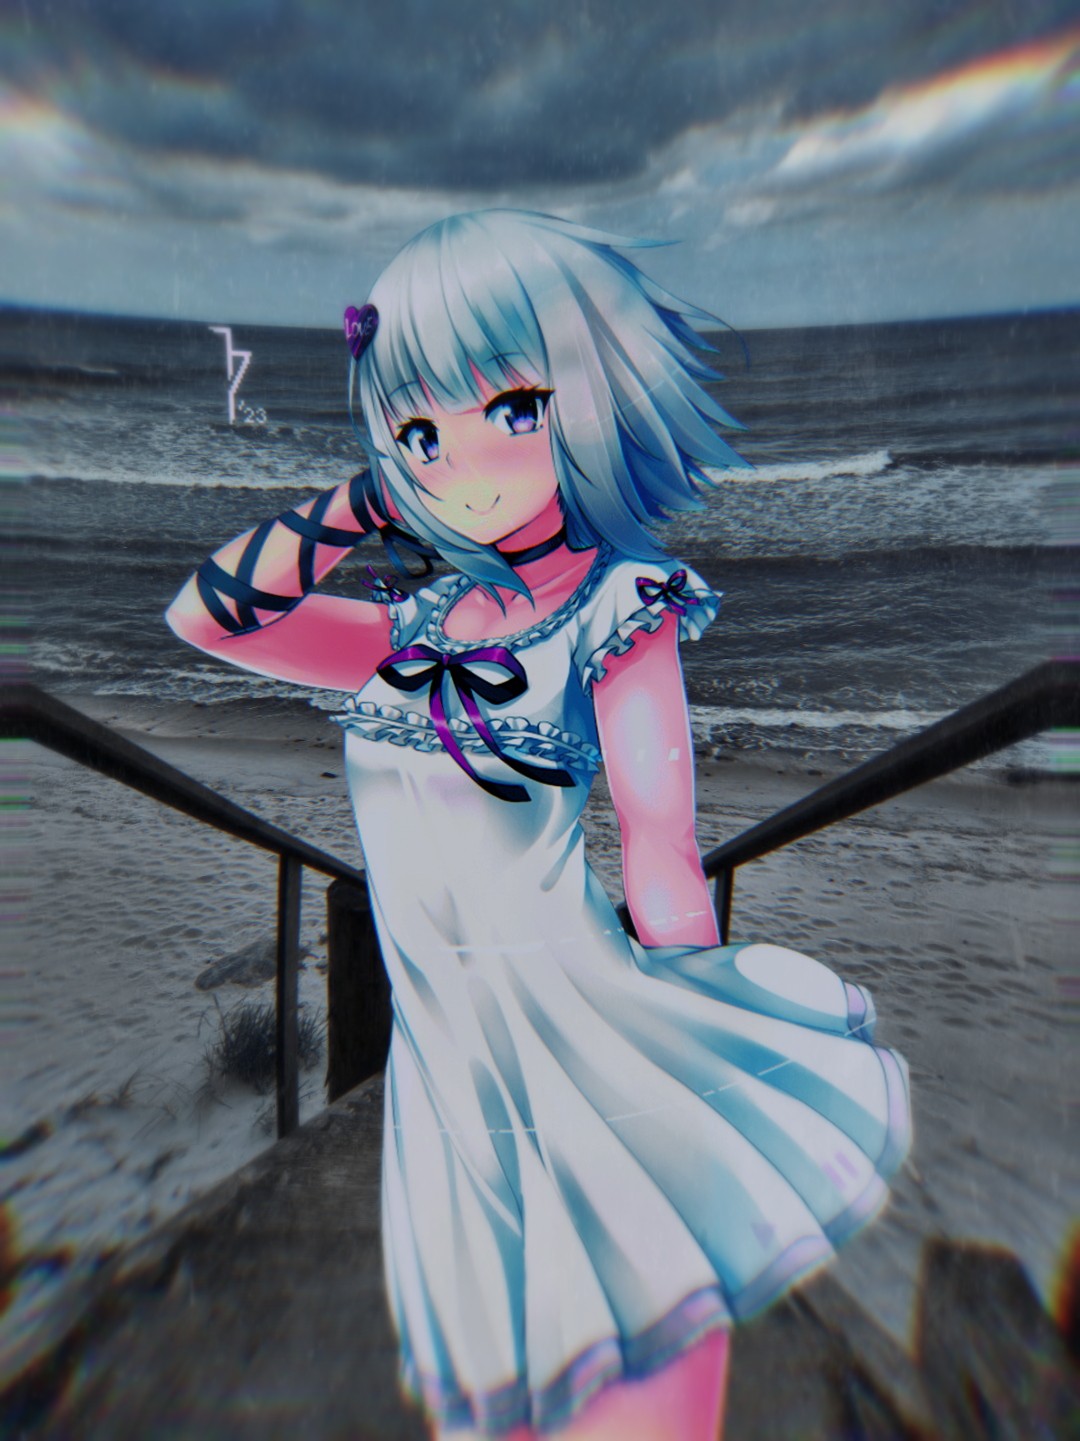 Anime 1080x1441 animeirl seashore clouds white hair white dress smiling portrait display sky short hair looking at viewer choker dress waves water bow tie blushing